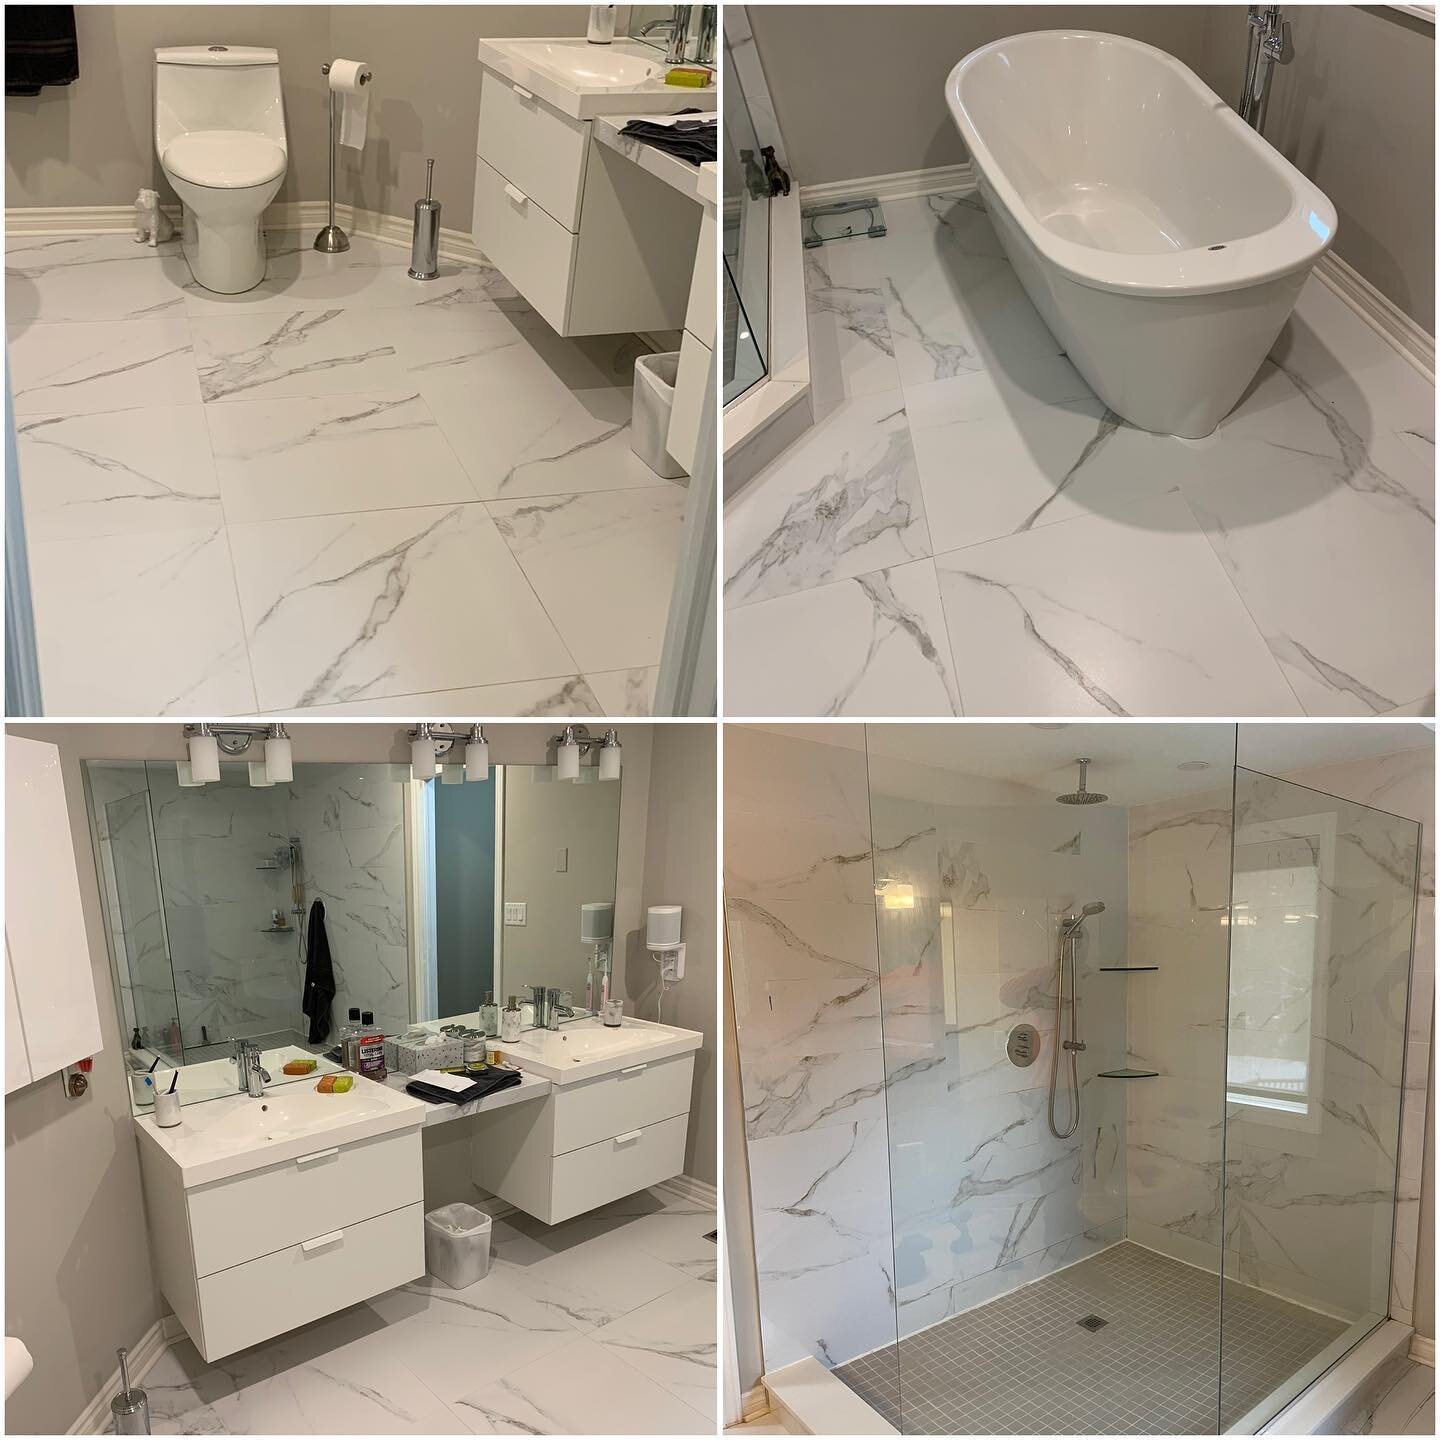 Piece of cake ! 🍰 This customer had a selective demolition, snd wanted the bathtub vanity&rsquo;s shower glass sink and taps removed and intact for resale. #demolition #demo #renovations #renovation #toronto #Barriedemolition #torontorenovations #ha